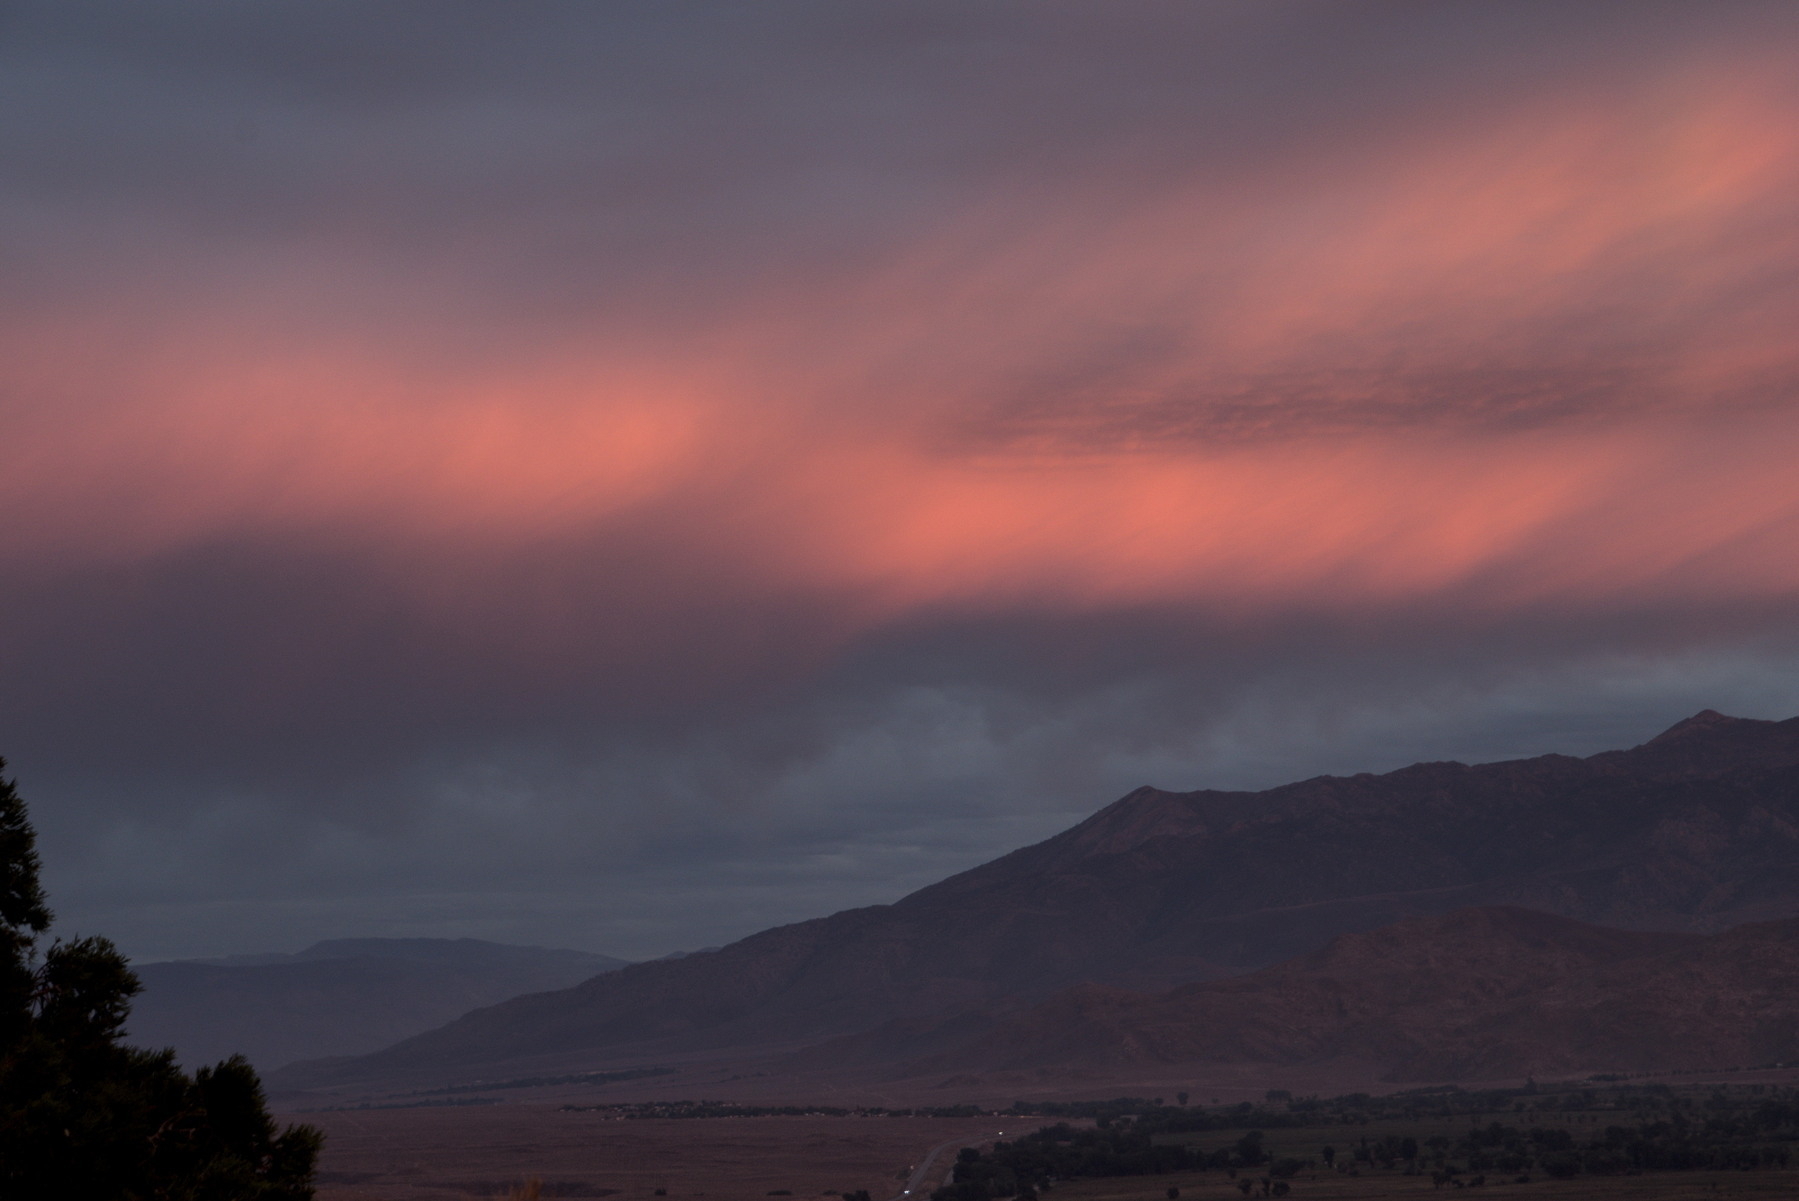 Pink cloud bank at sunset over trailing edge of the Sierra Nevada